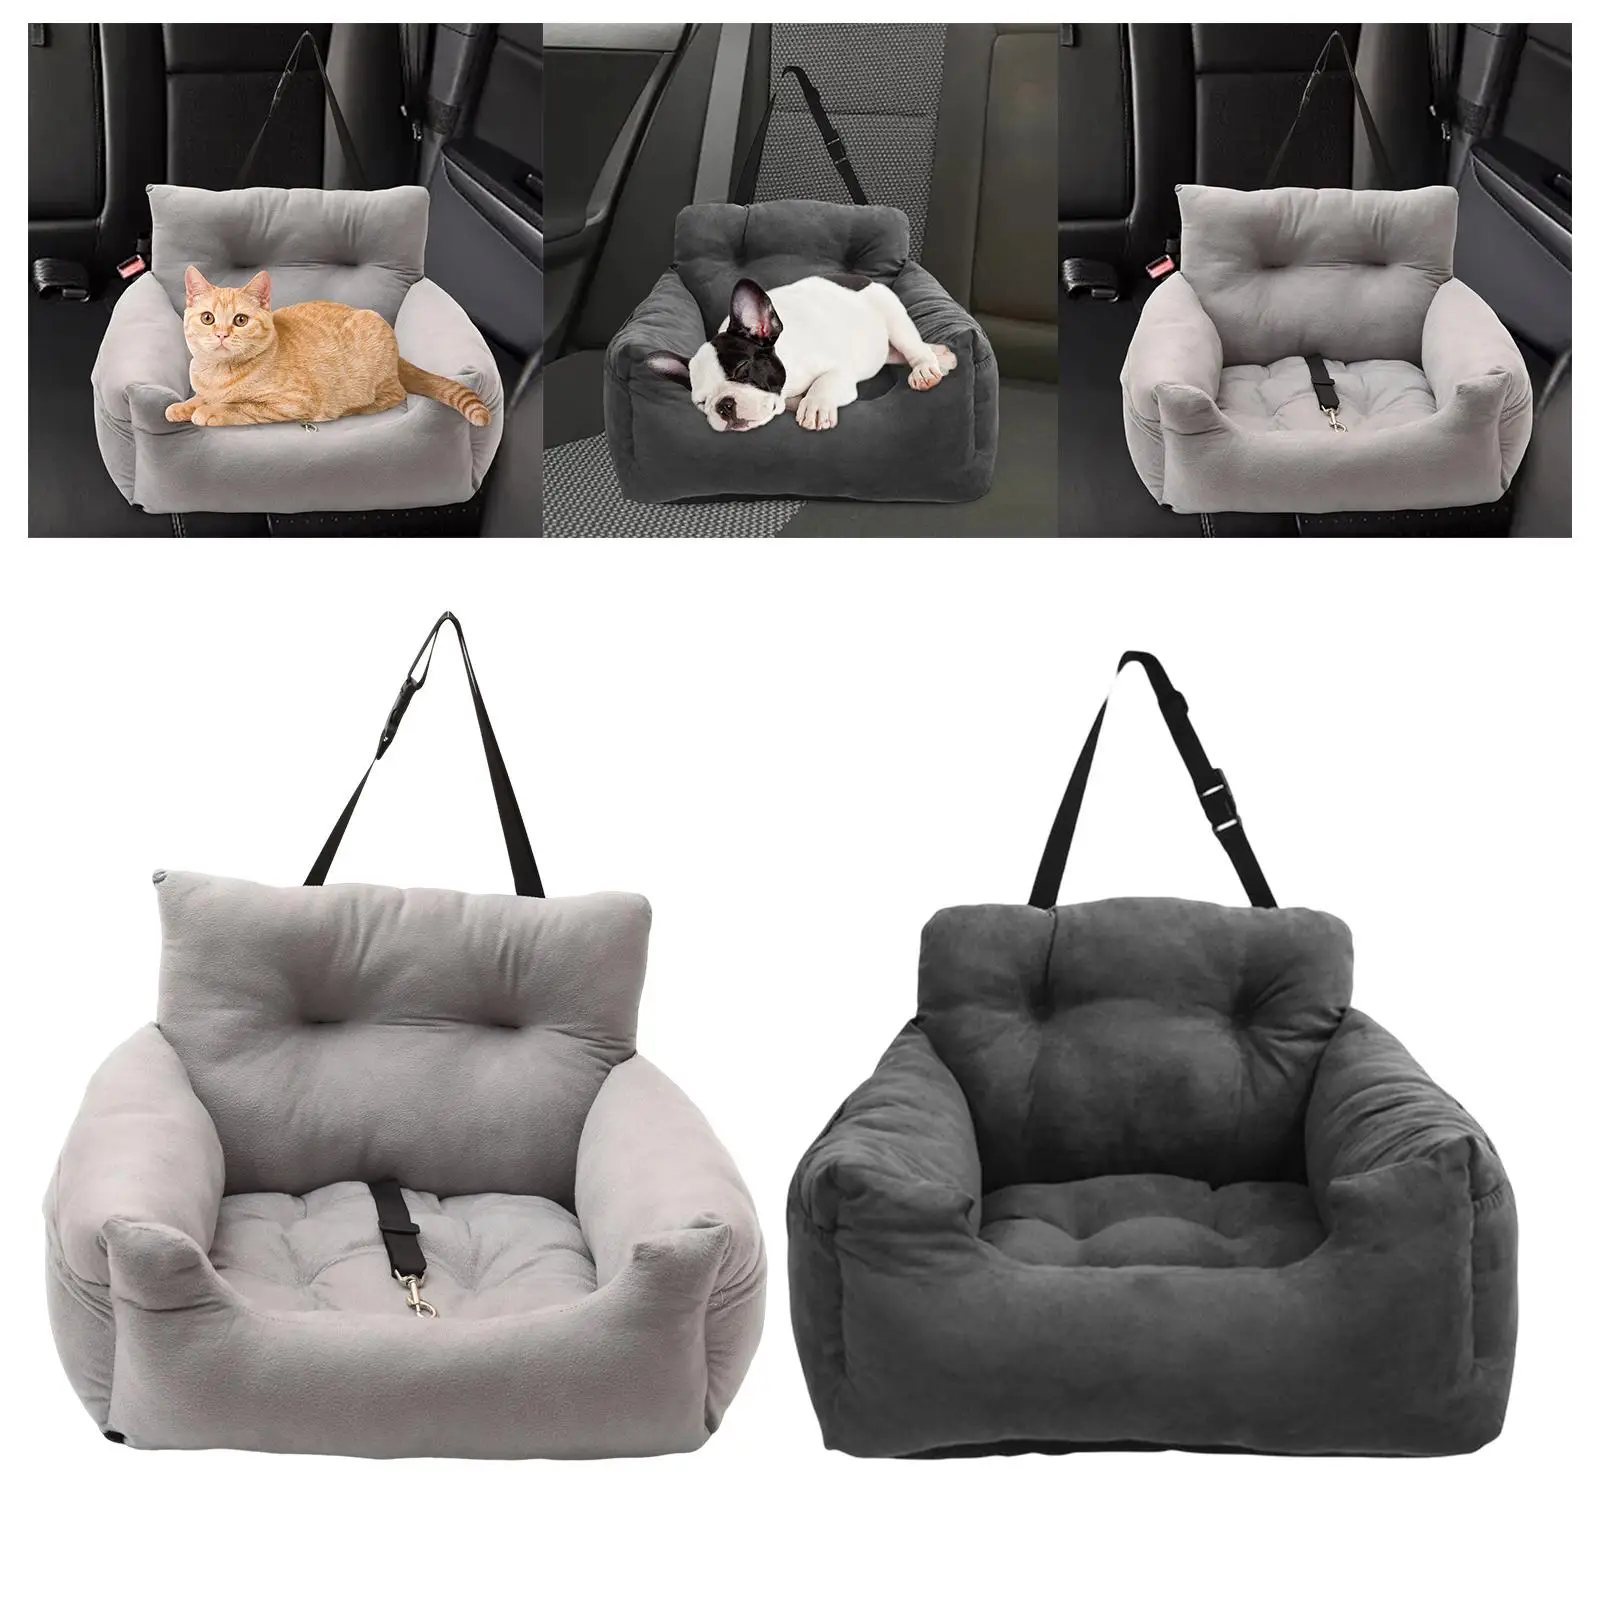 Portable Dog Car Seat Durable Soft Comfortable Kennel Travel Bed Protector Dog Booster Seat for Pet Accessories Cats Puppy